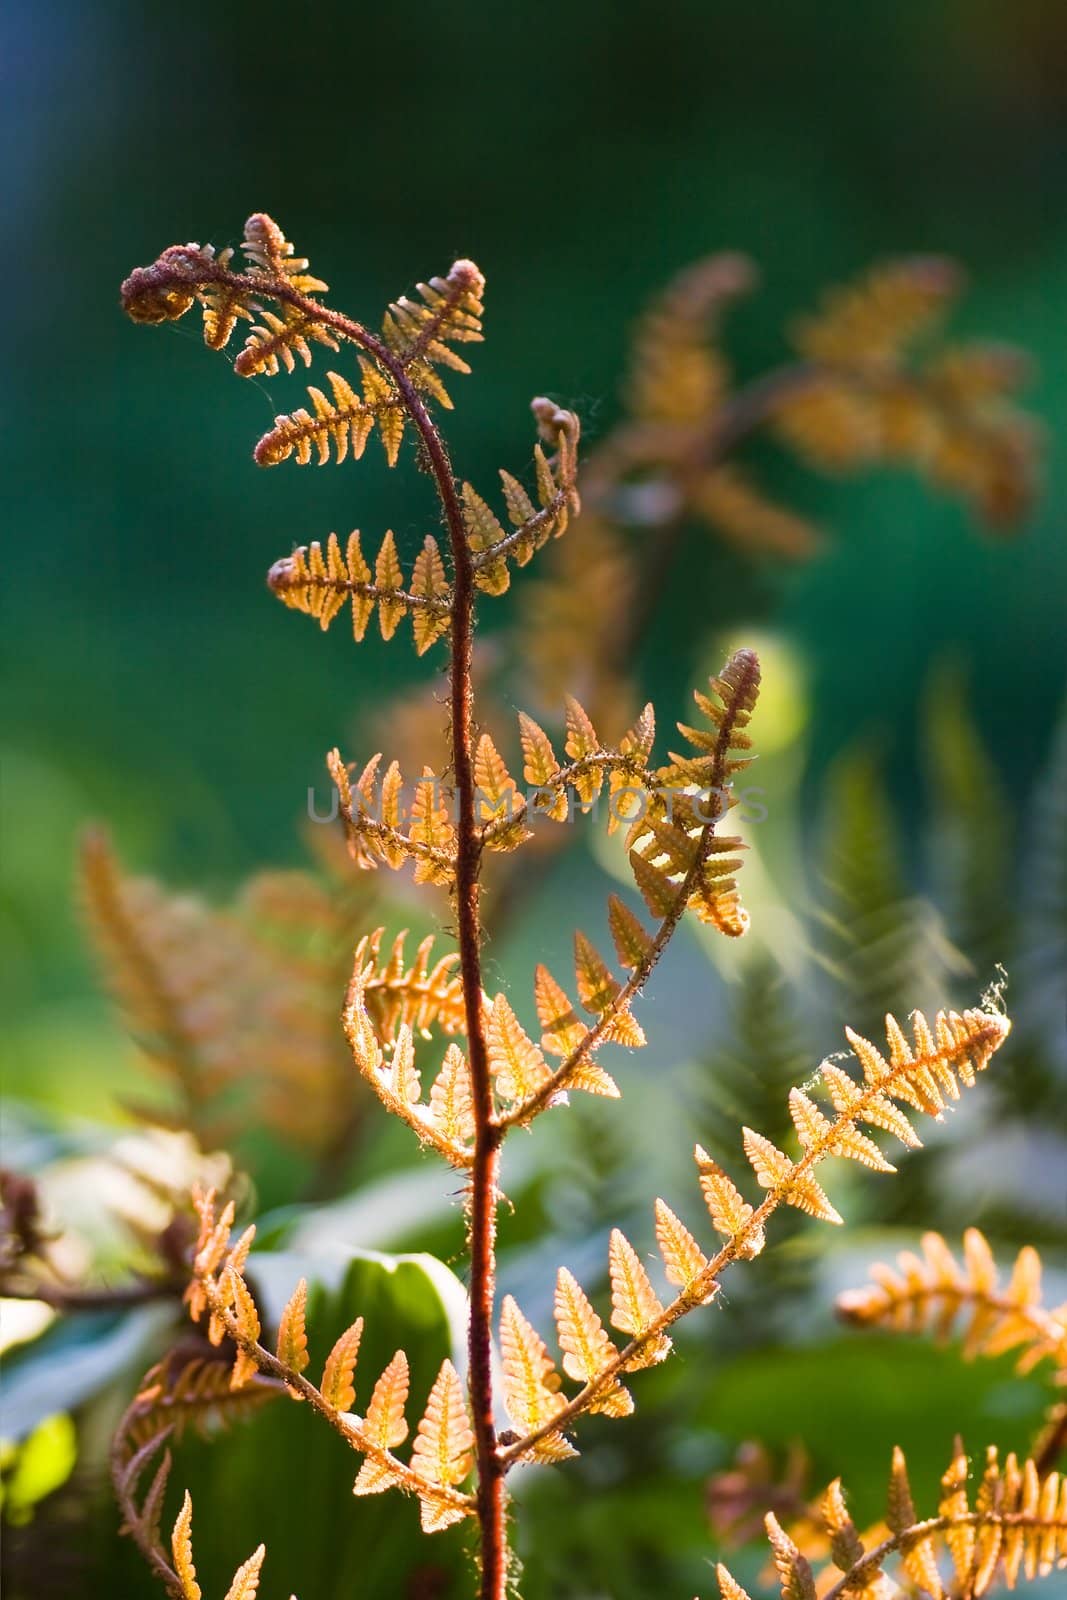 Young bronze-coloured leaf on fern at sunset in spring-shallow dof-vertical image